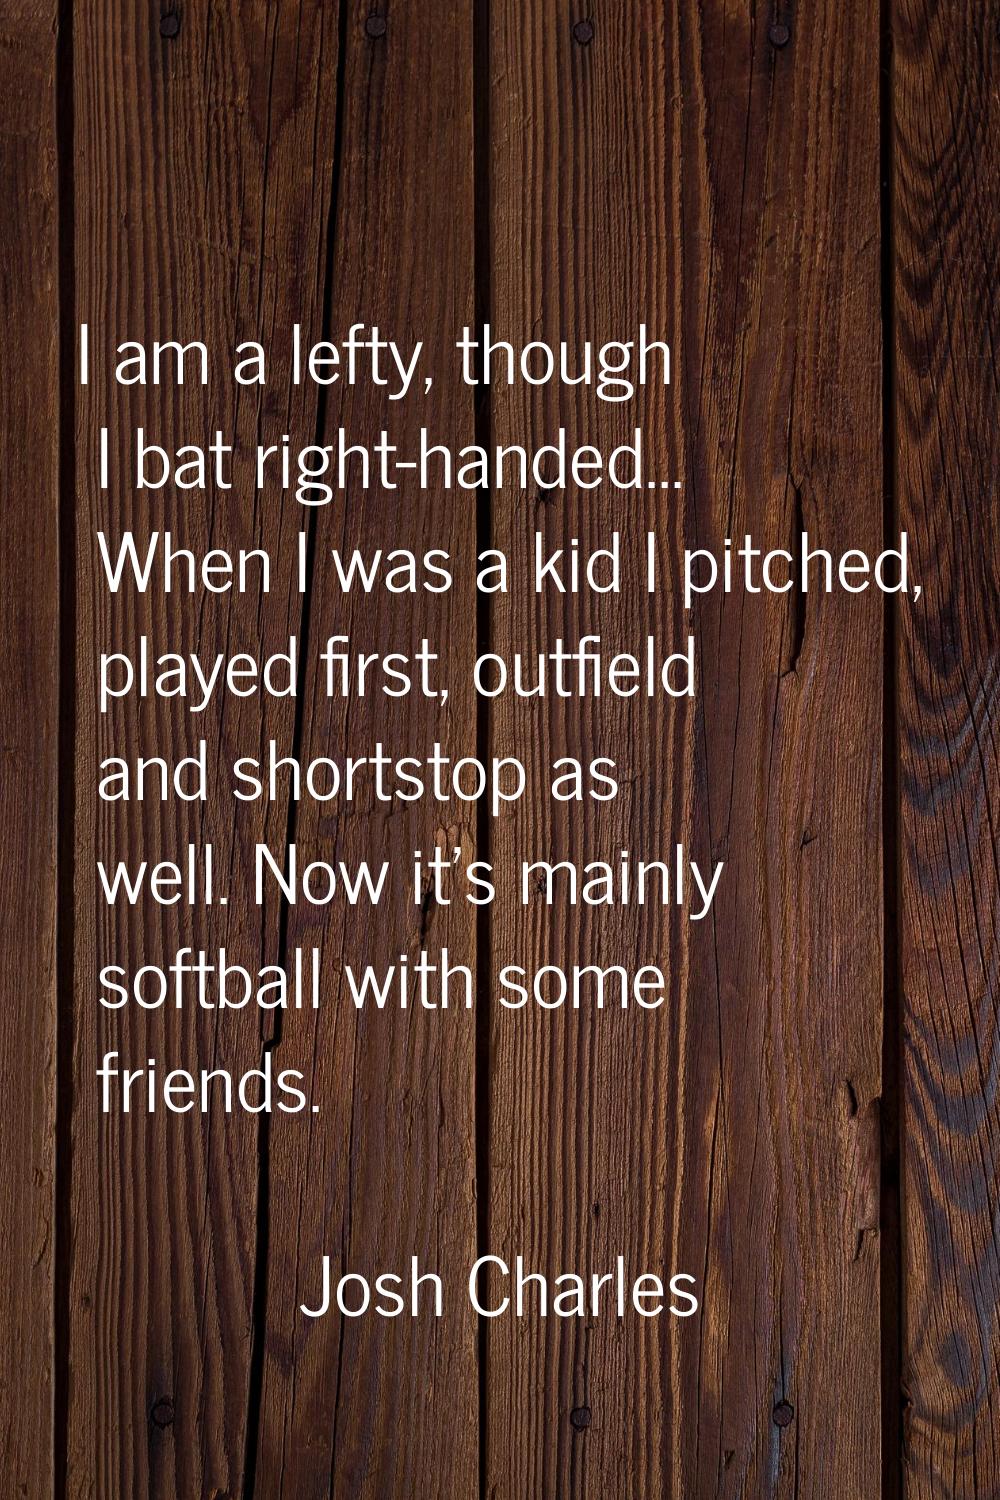 I am a lefty, though I bat right-handed... When I was a kid I pitched, played first, outfield and s